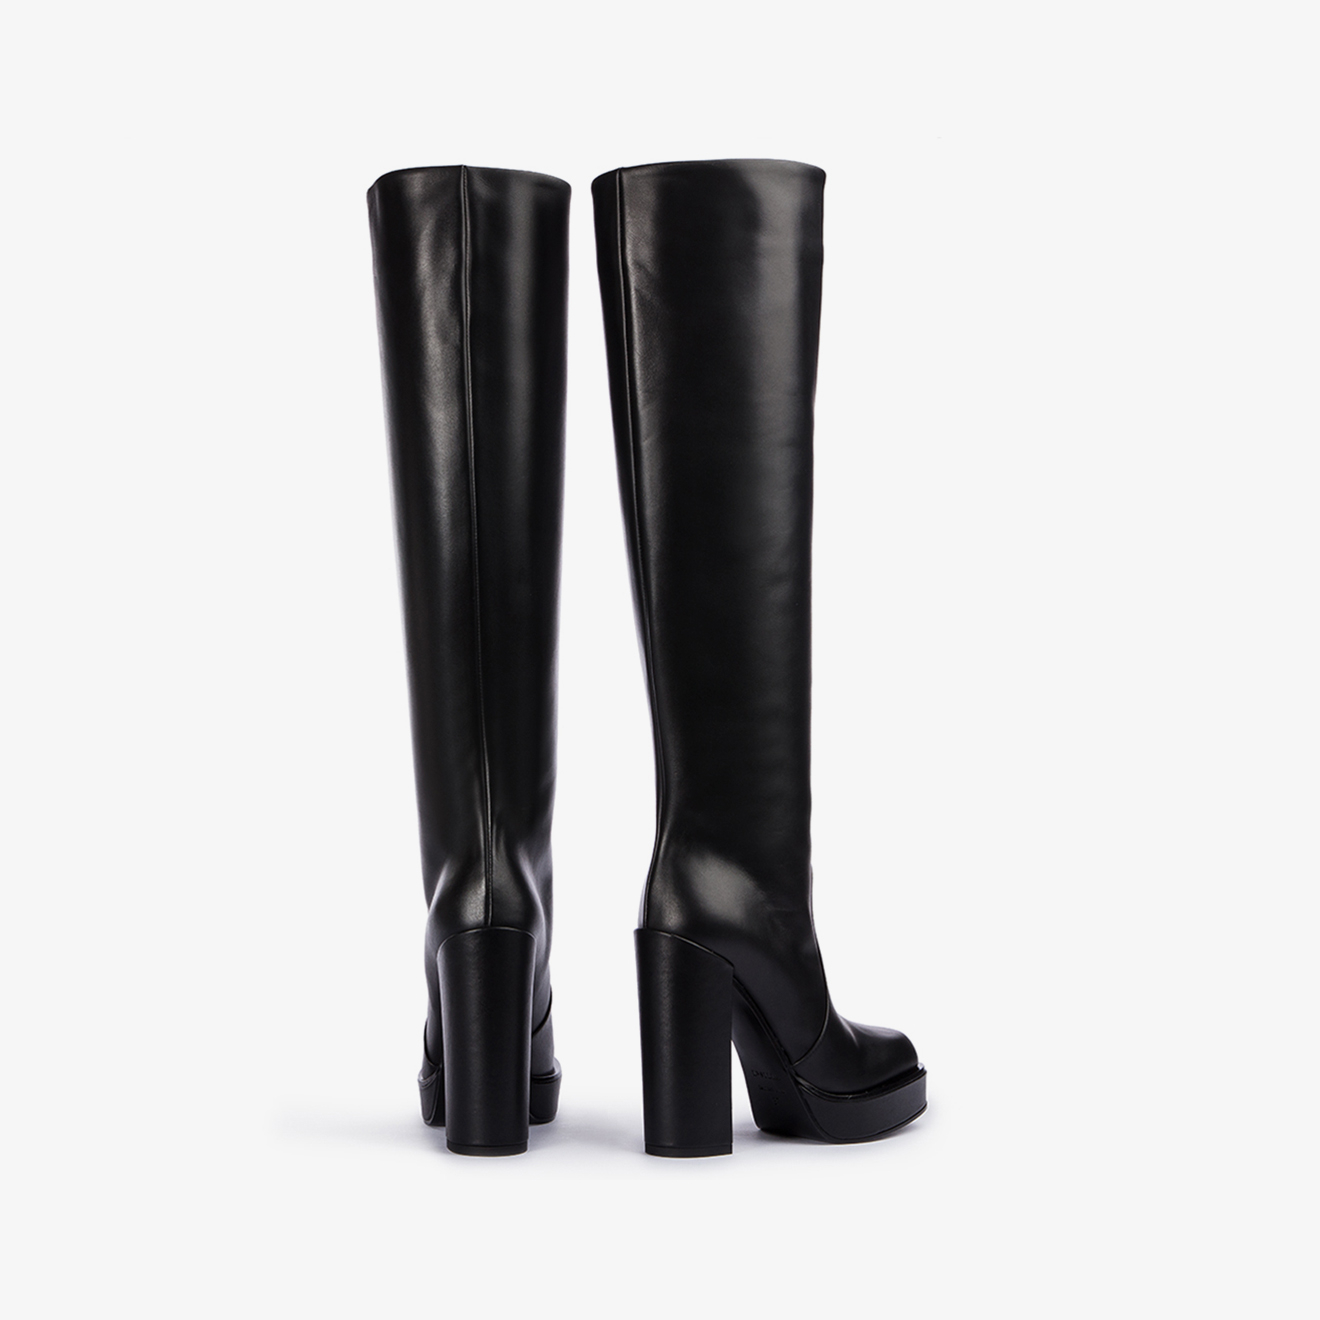 LANA BOOT 130 mm - Le Silla official outlet